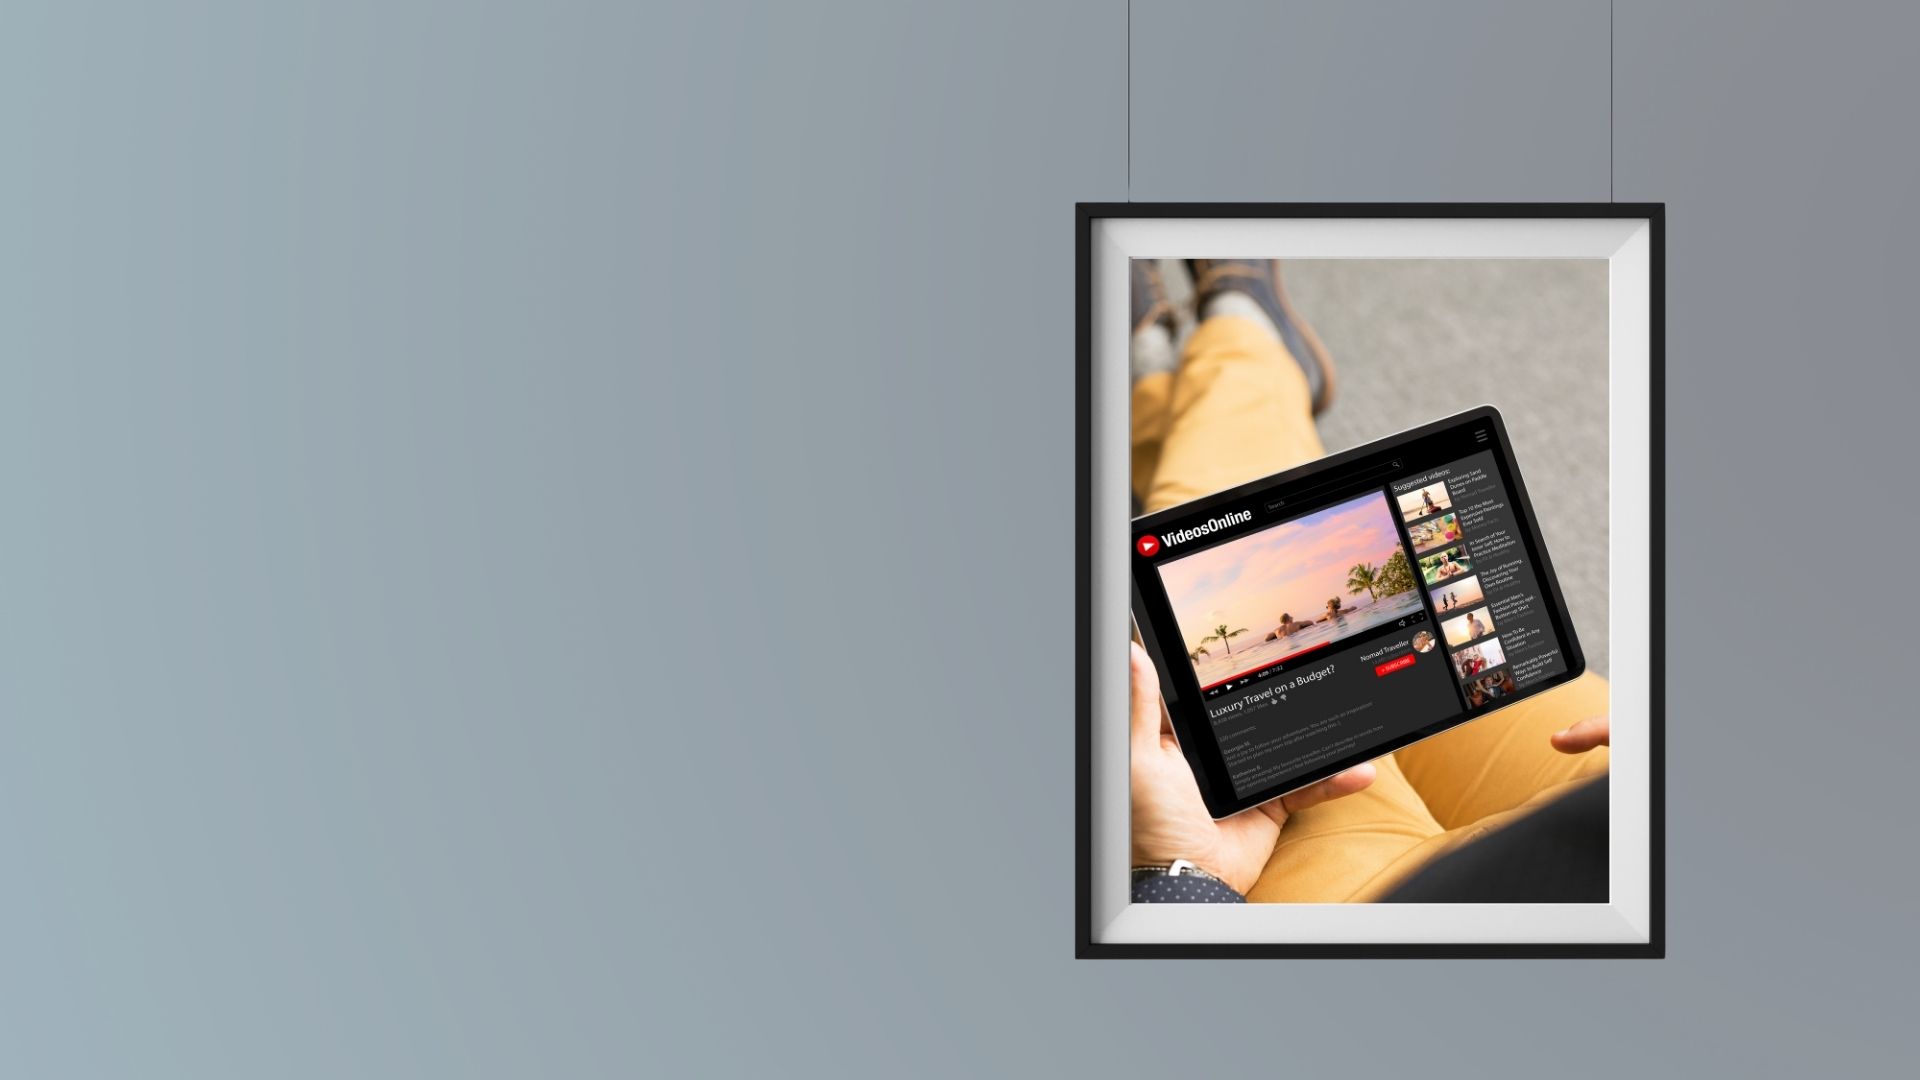 Picture with a tablet inside that displays someone watching youtube